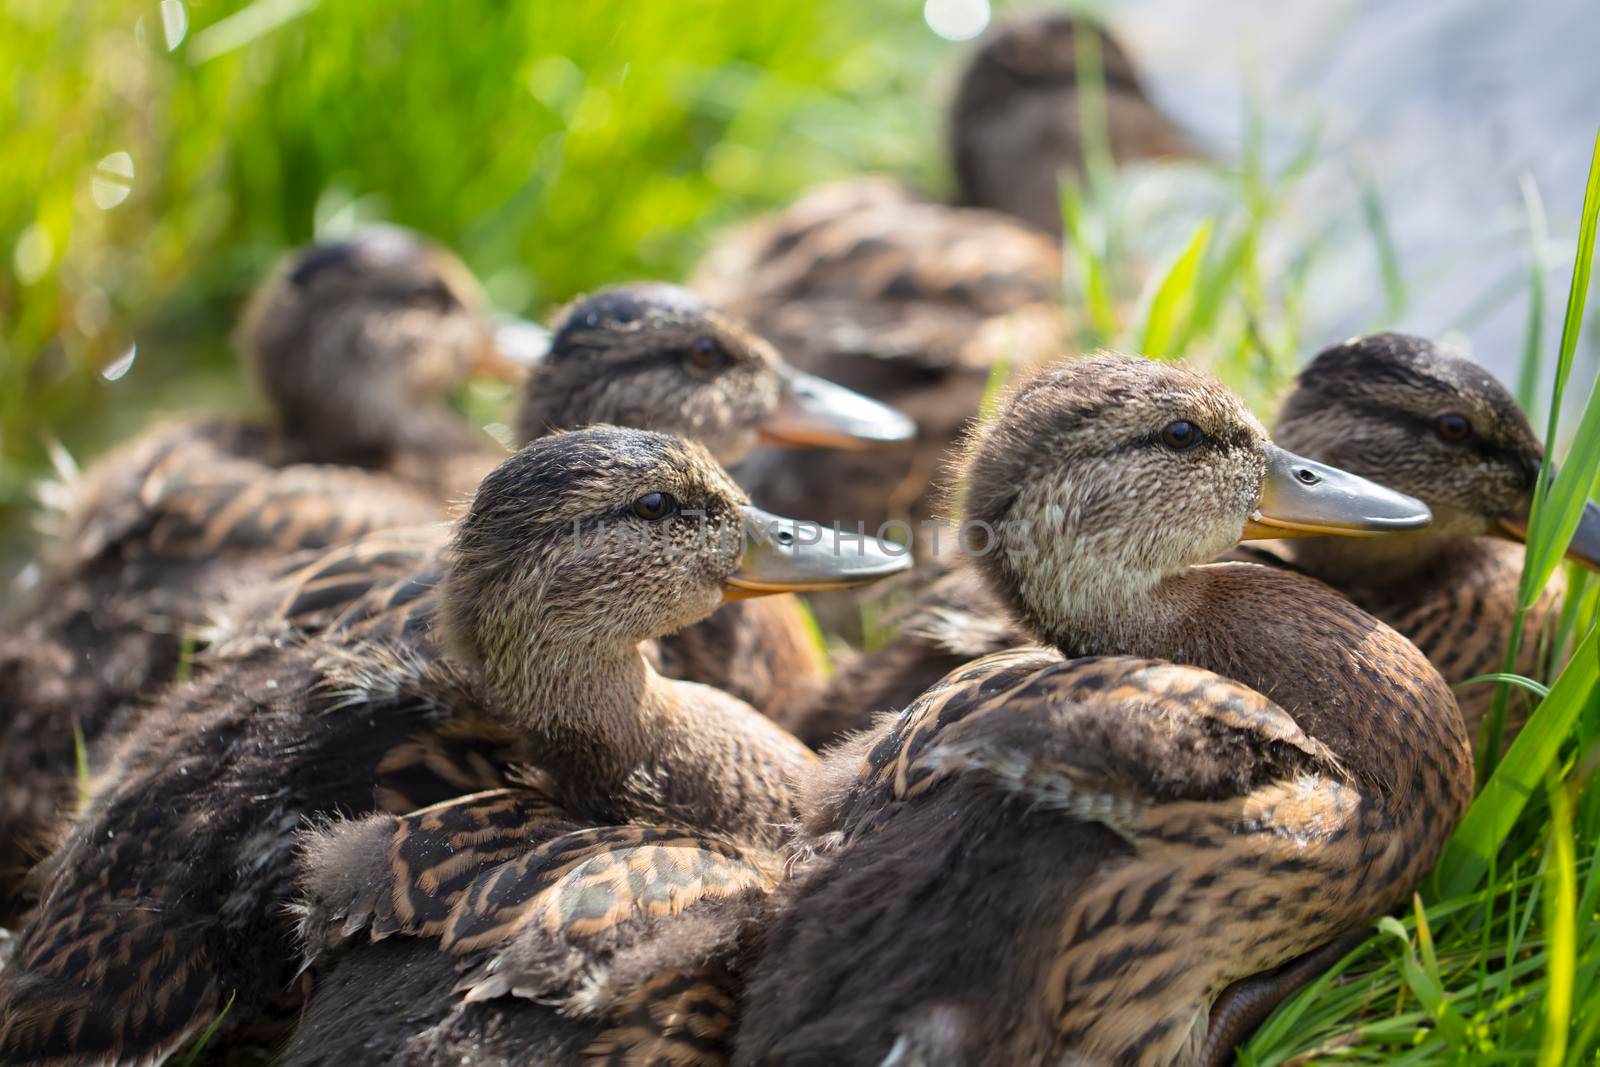 Group of common gray ducks close-up.